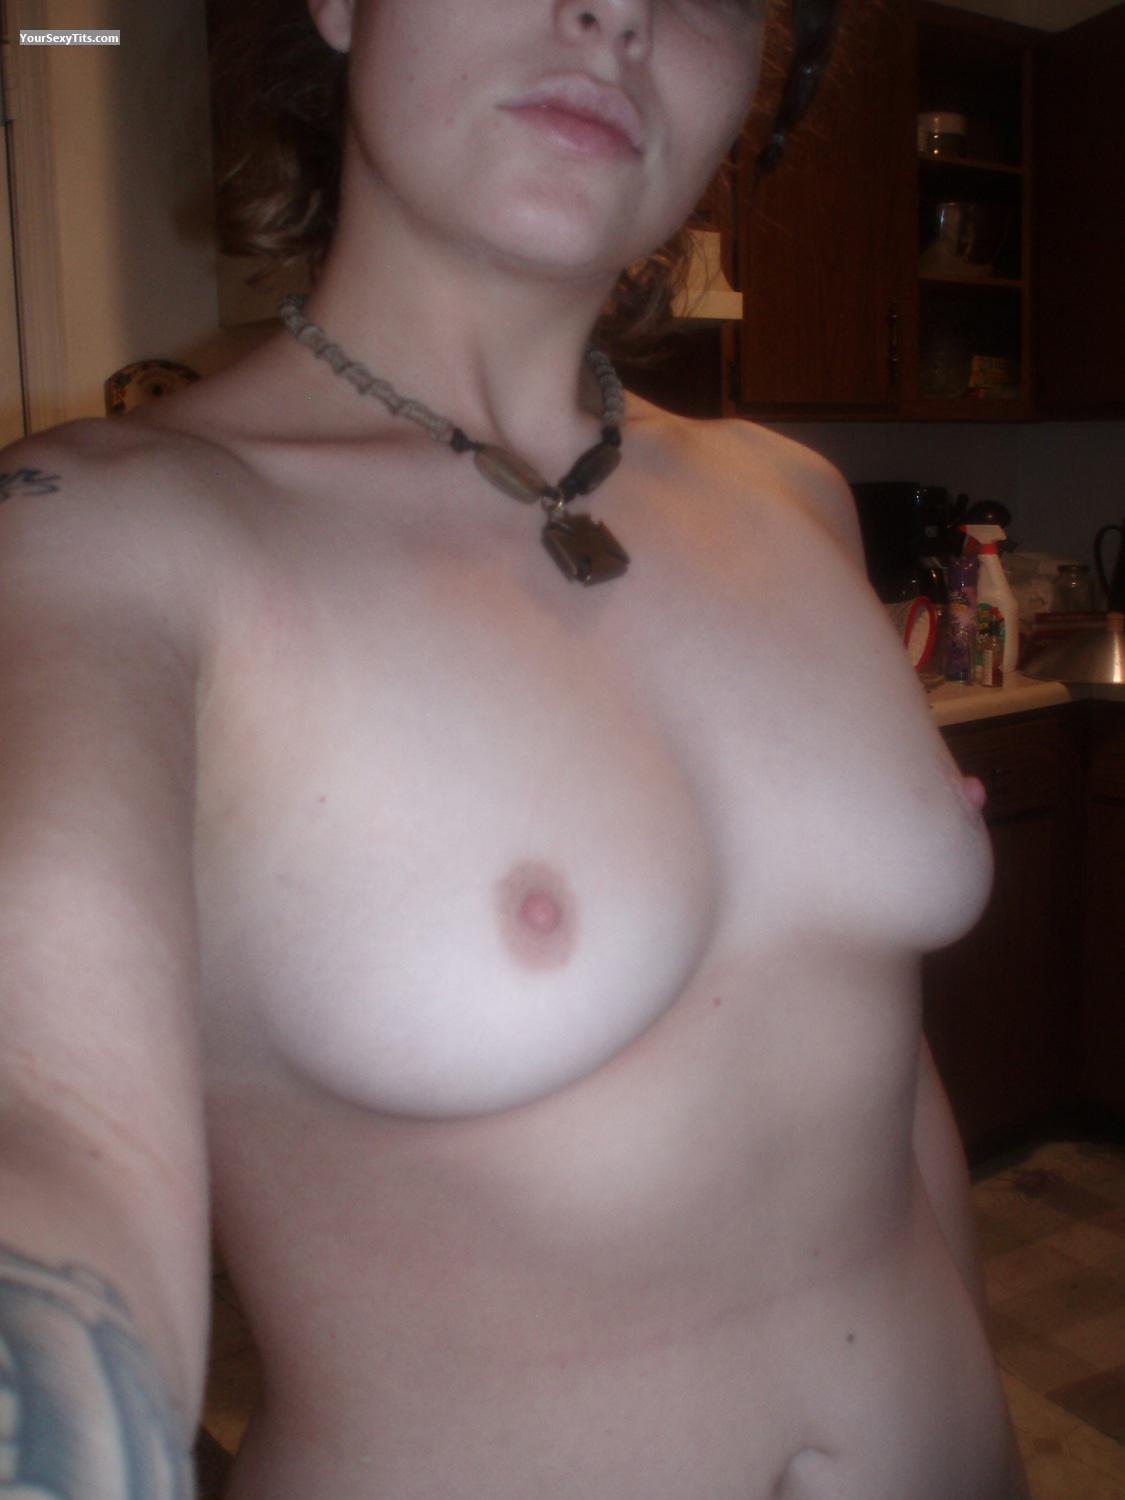 Tit Flash: My Small Tits (Selfie) - Sara from United States